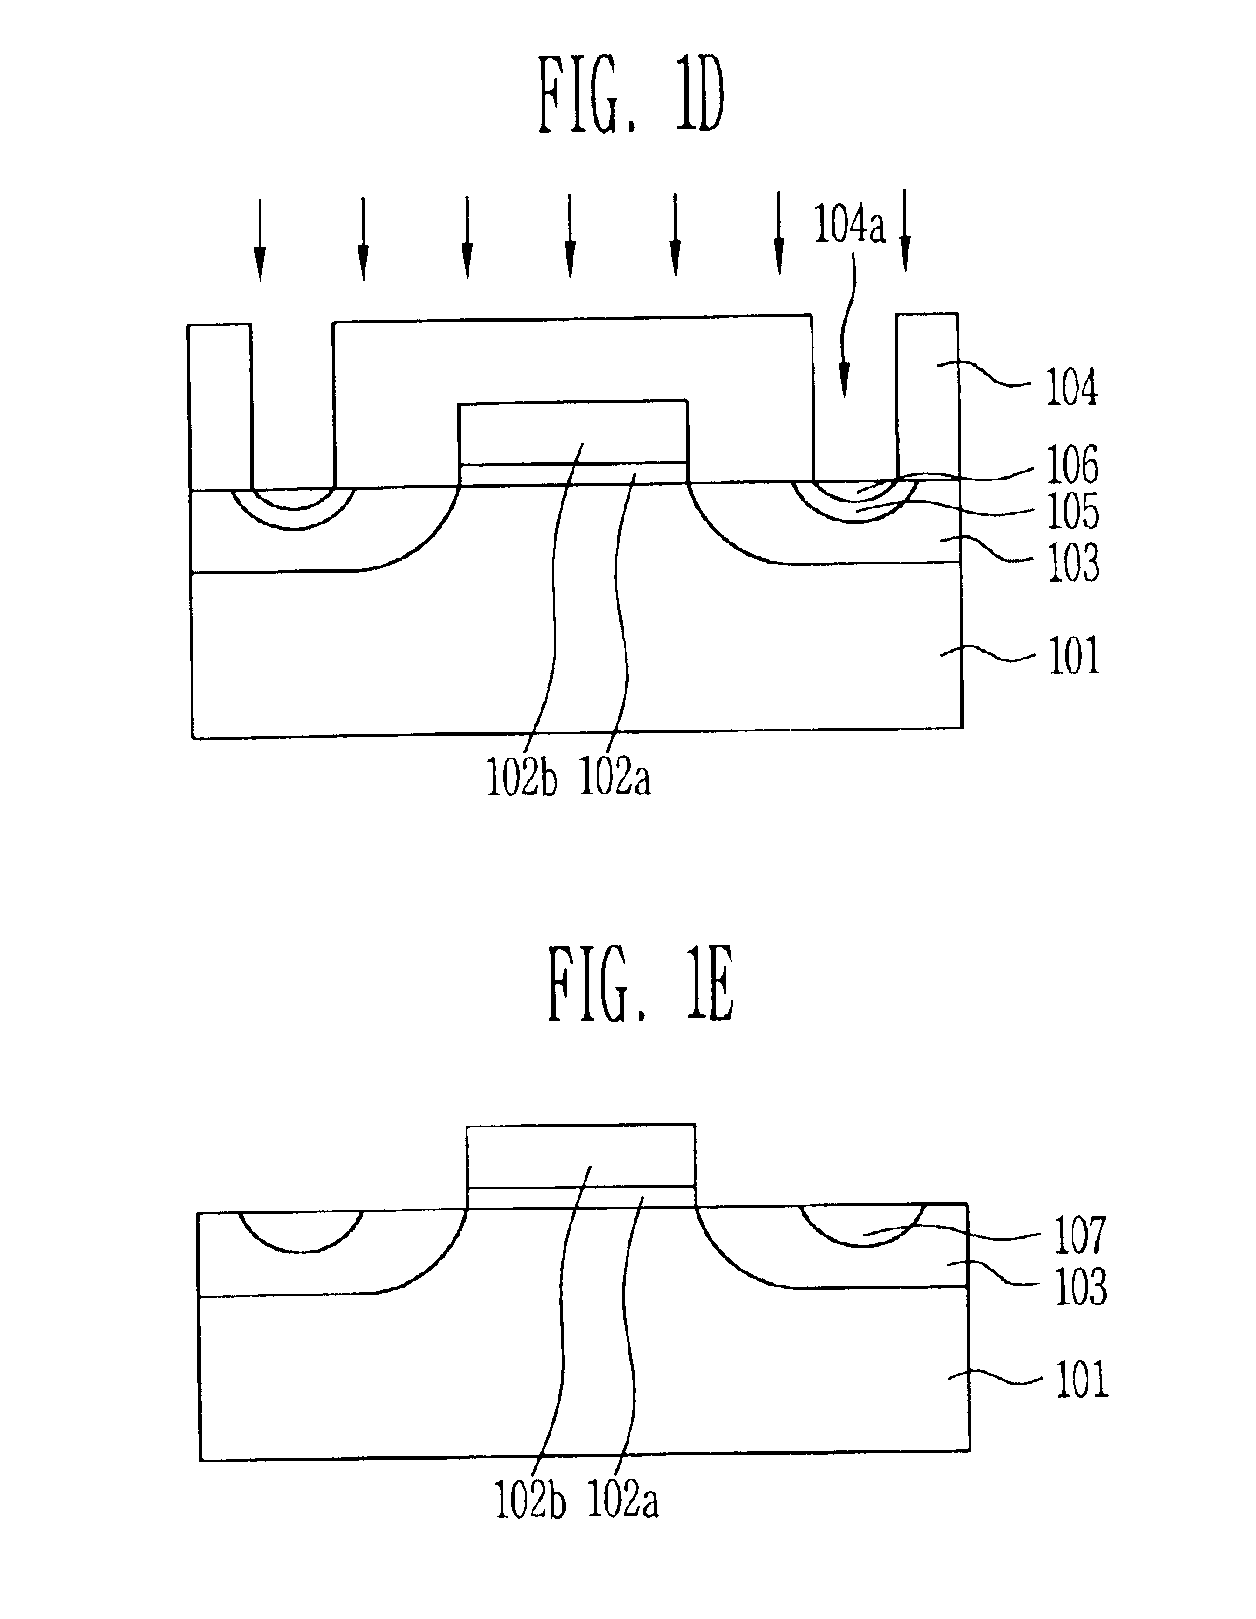 Method of forming high voltage junction in semiconductor device